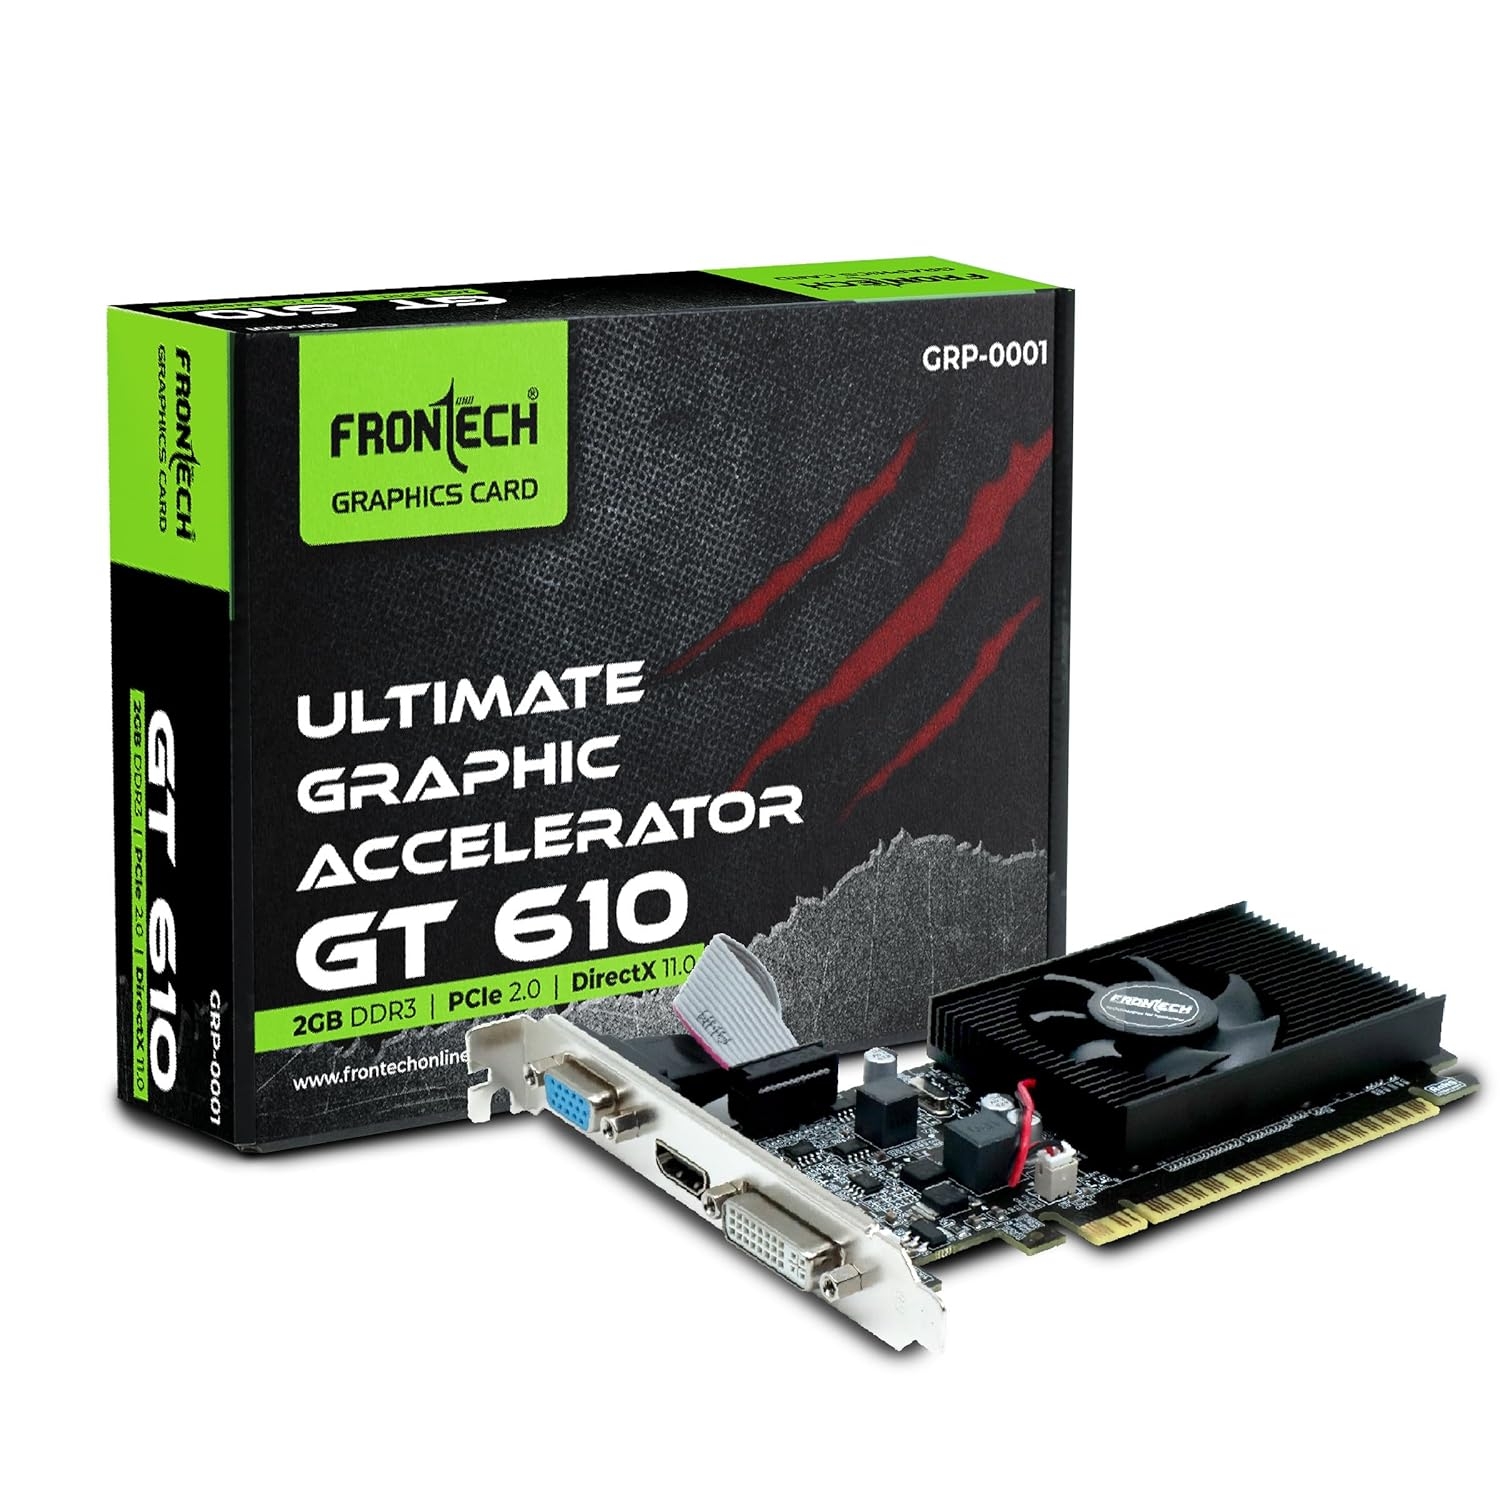 FRONTECH GT610-2GD3 Graphics Card | 2 GB DDR3 64 BIts PCI Express RAM, Quality Gaming Graphics Card, Single Cooling Fan, 3Y Warranty (GRP-0001) Graphics Card